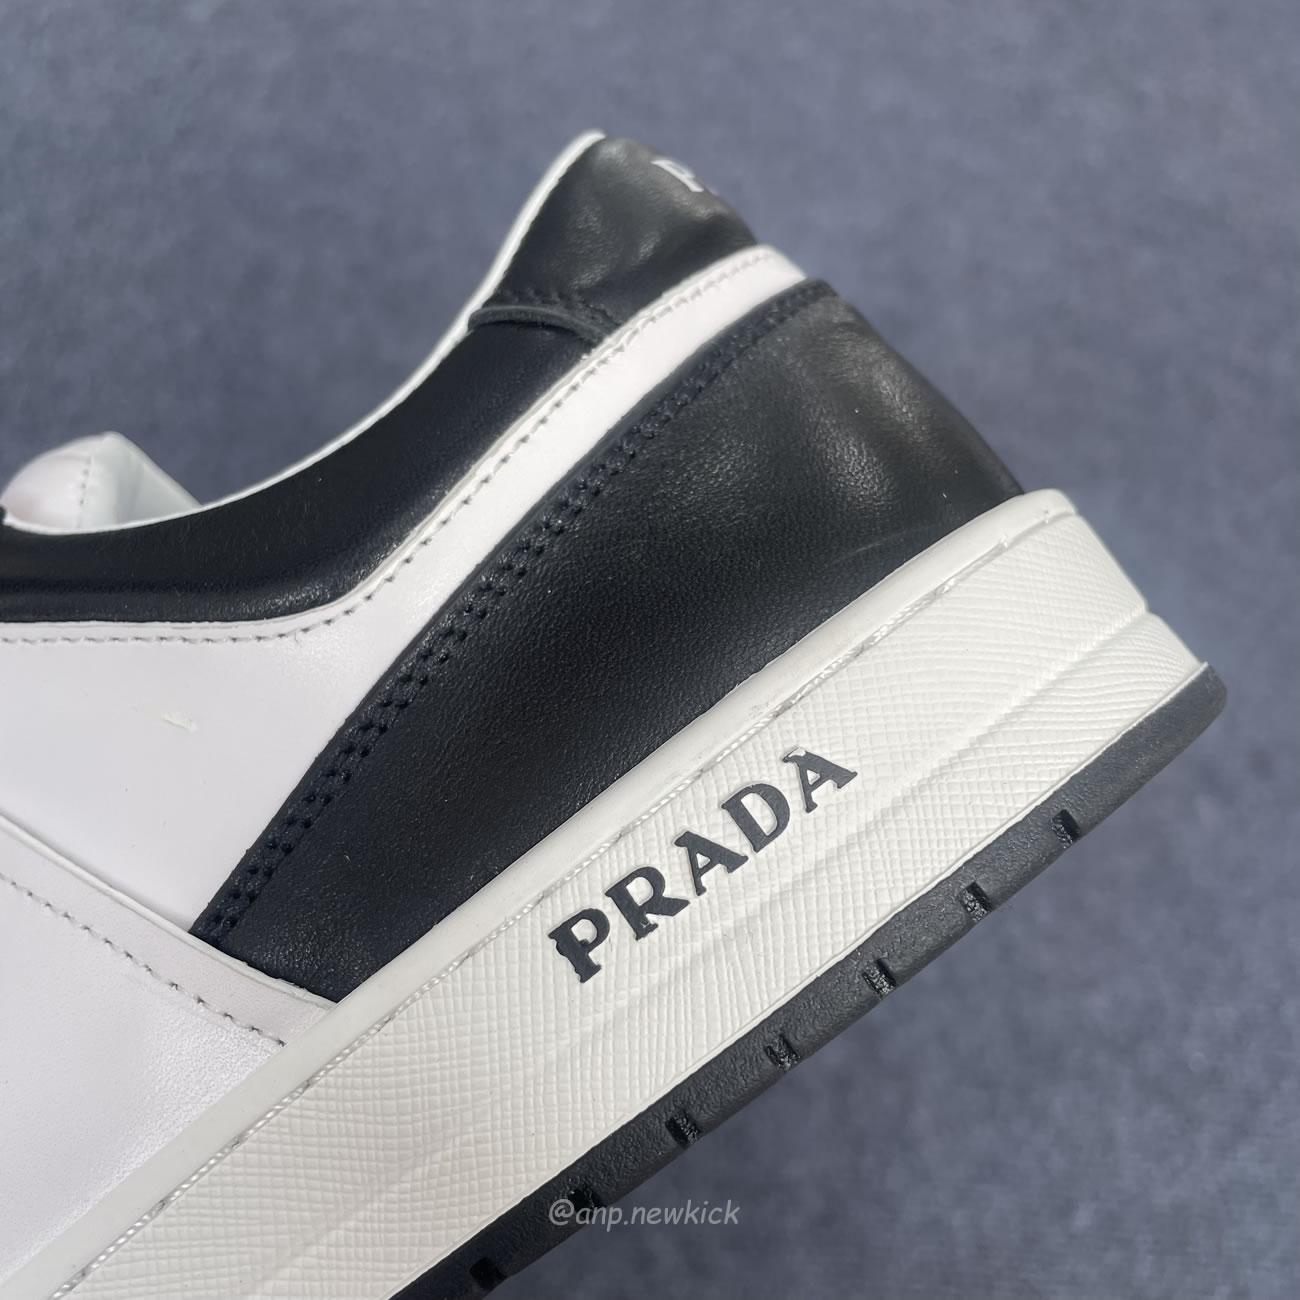 Prada Downtown Low Top Sneakers Leather White Black 2ee364 3lkg F0964 (7) - newkick.org